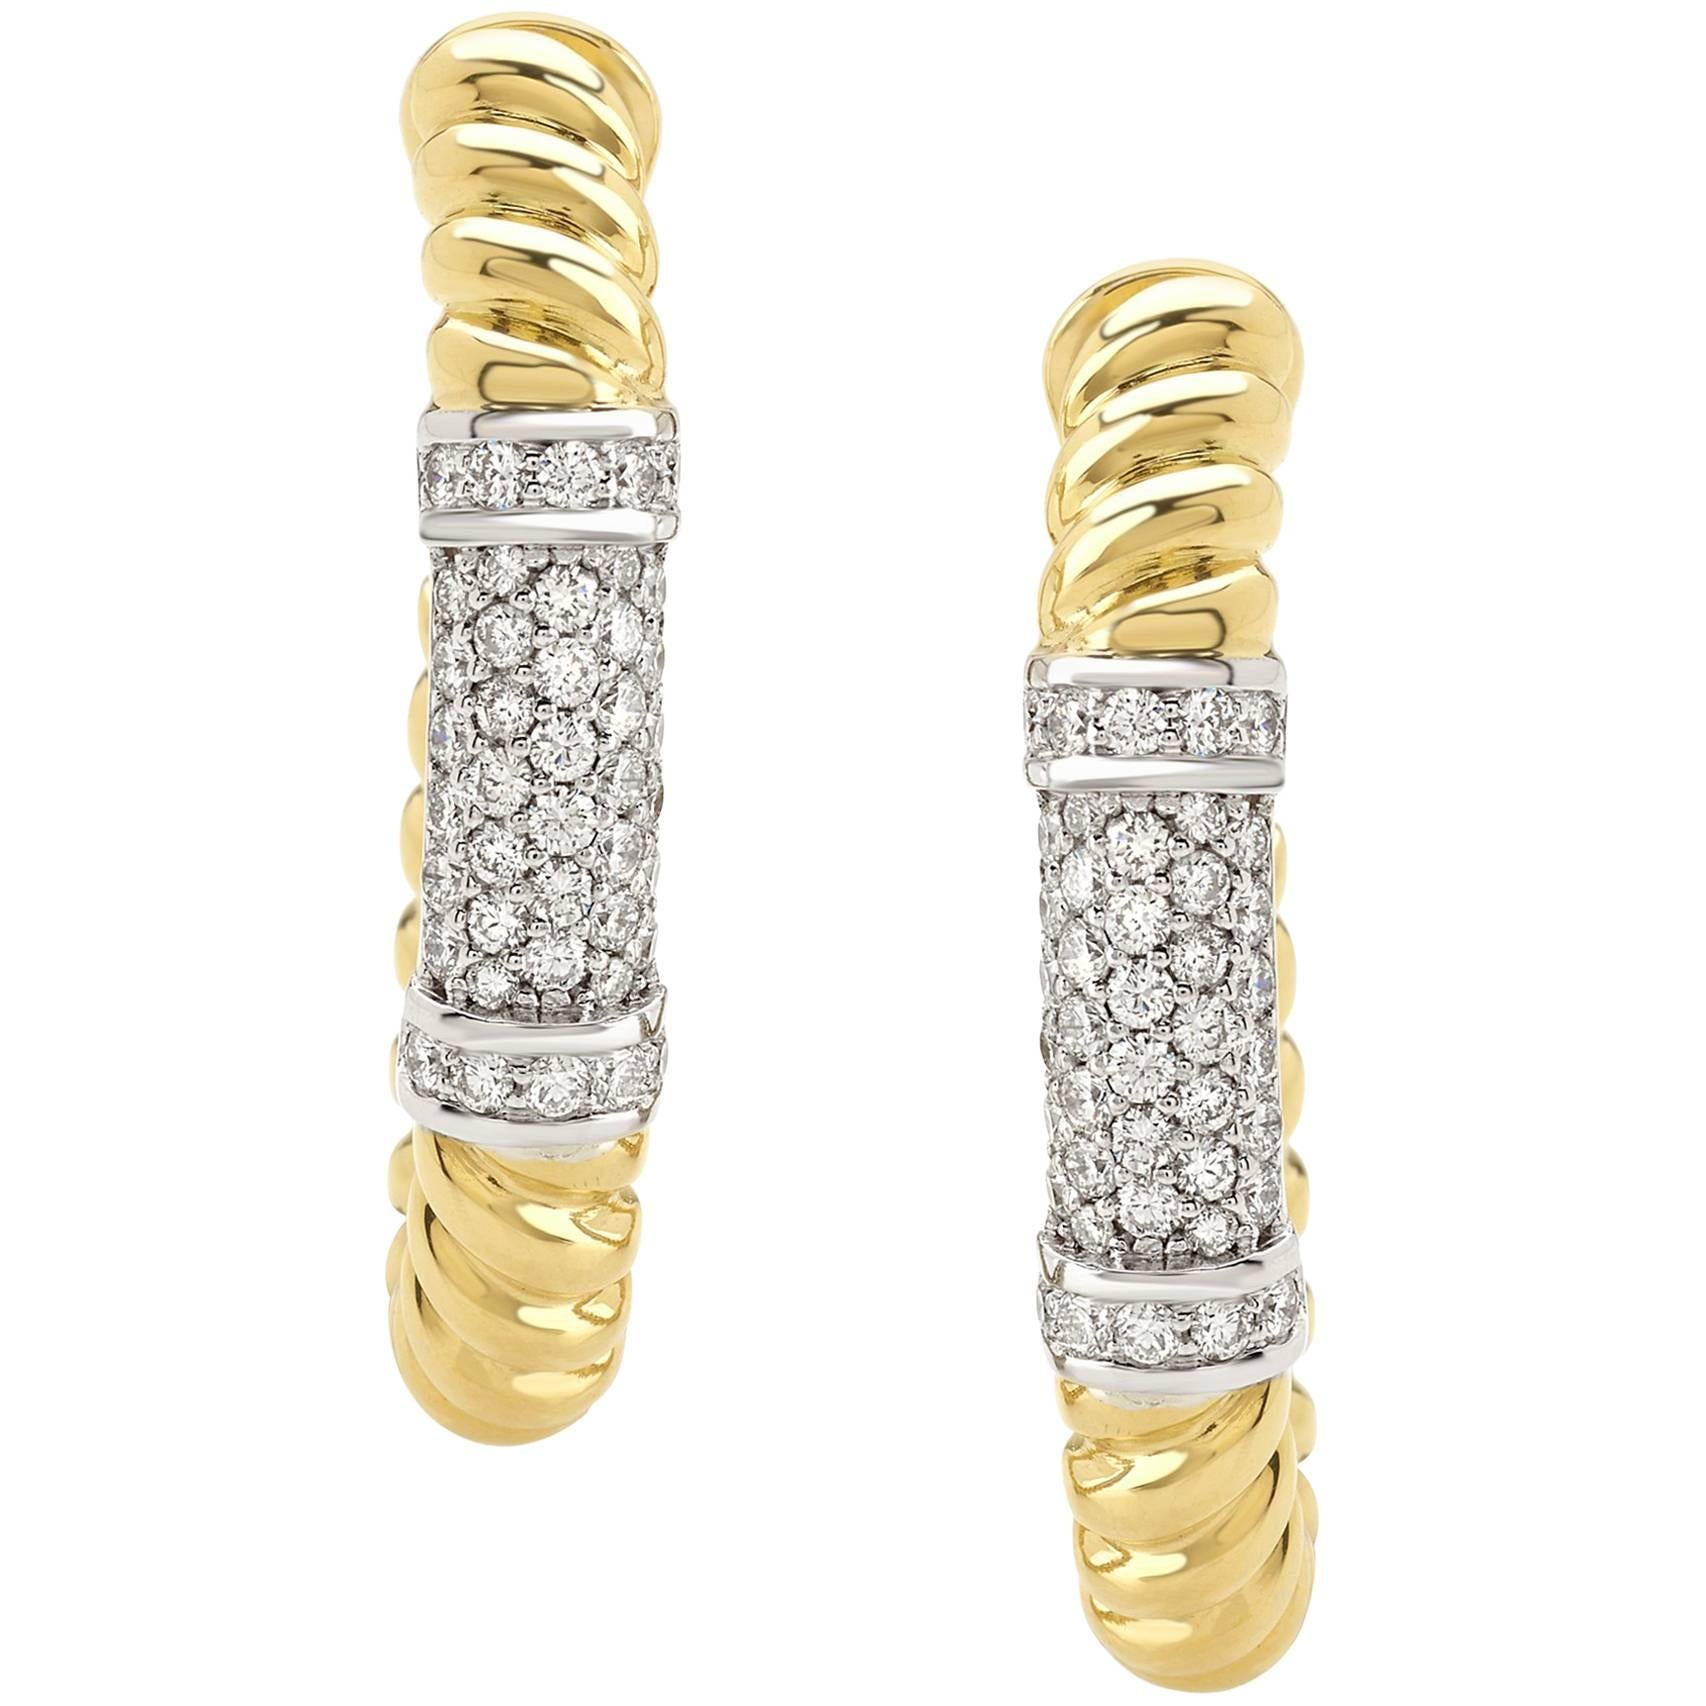 Pair of Earrings from the Collection "Rope" 18 Karat Yellow Gold and Diamonds For Sale